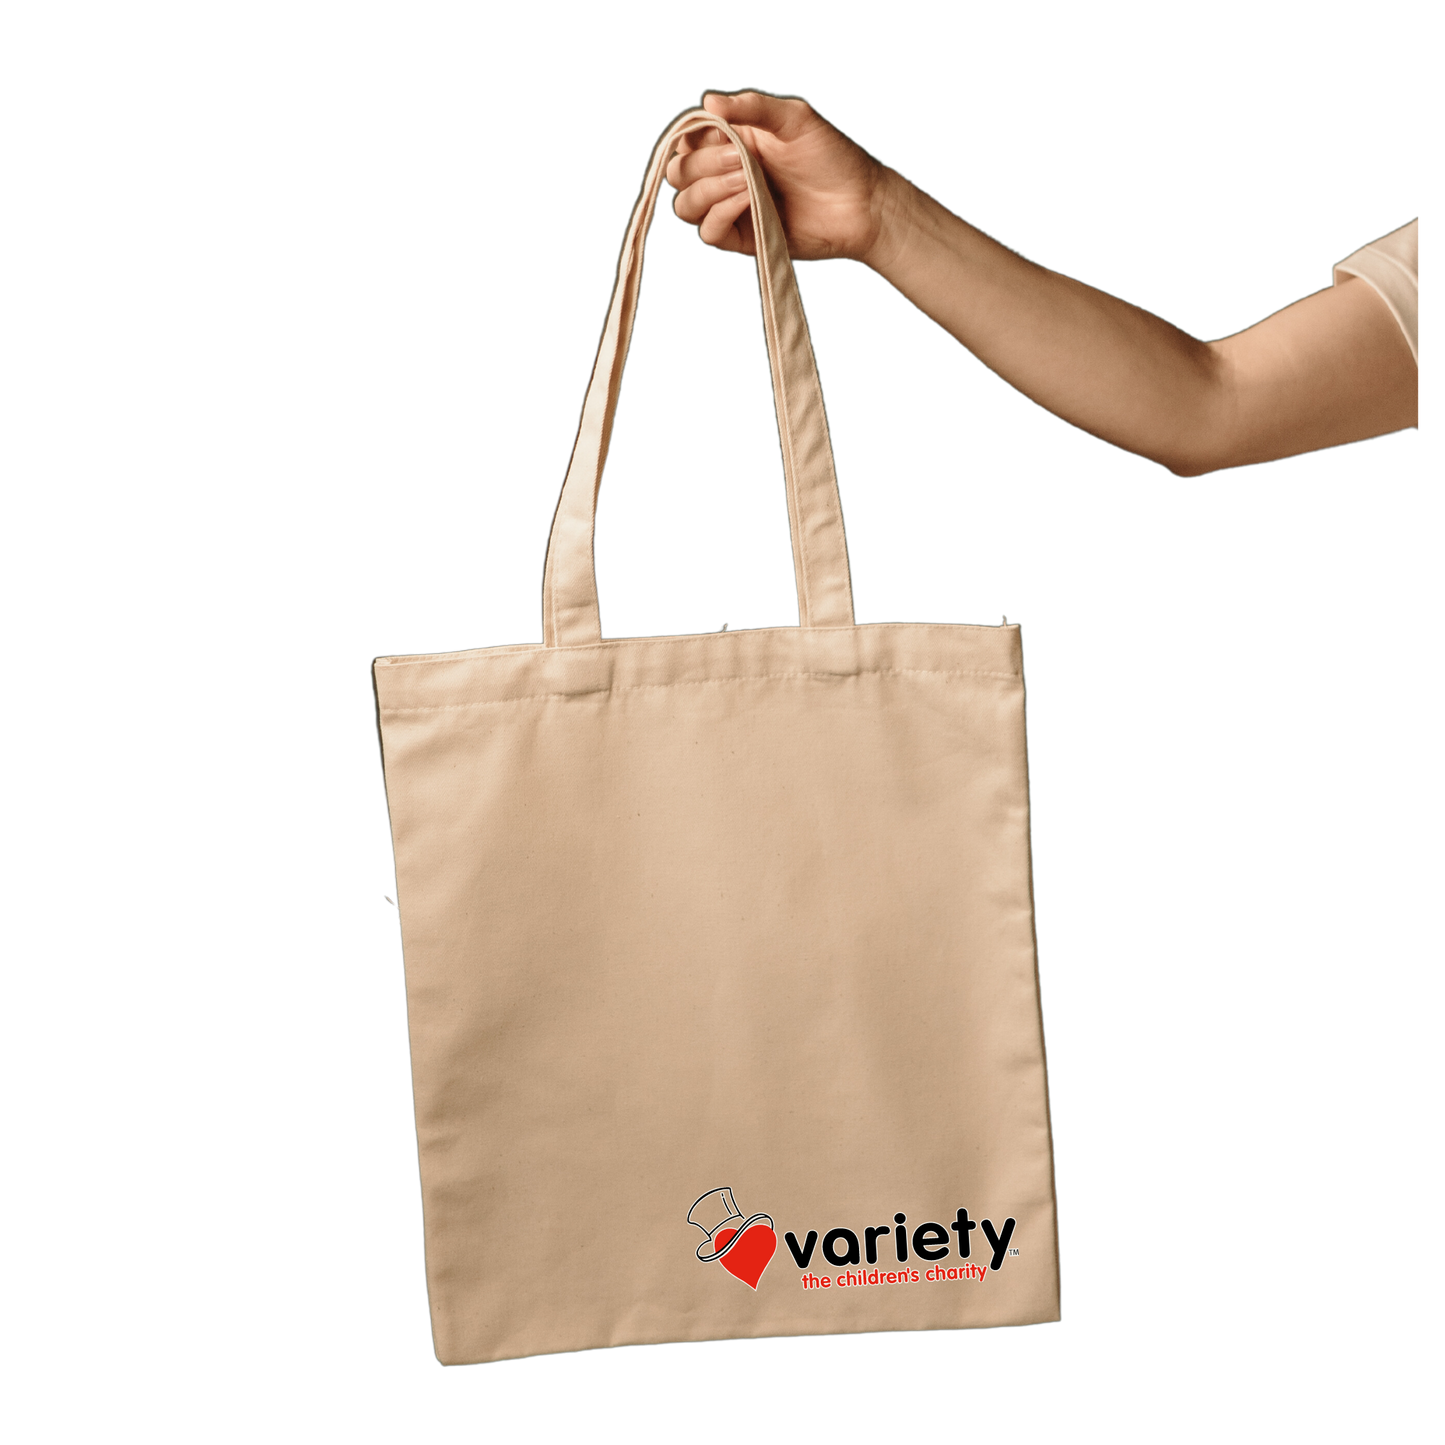 Variety cotton tote bag